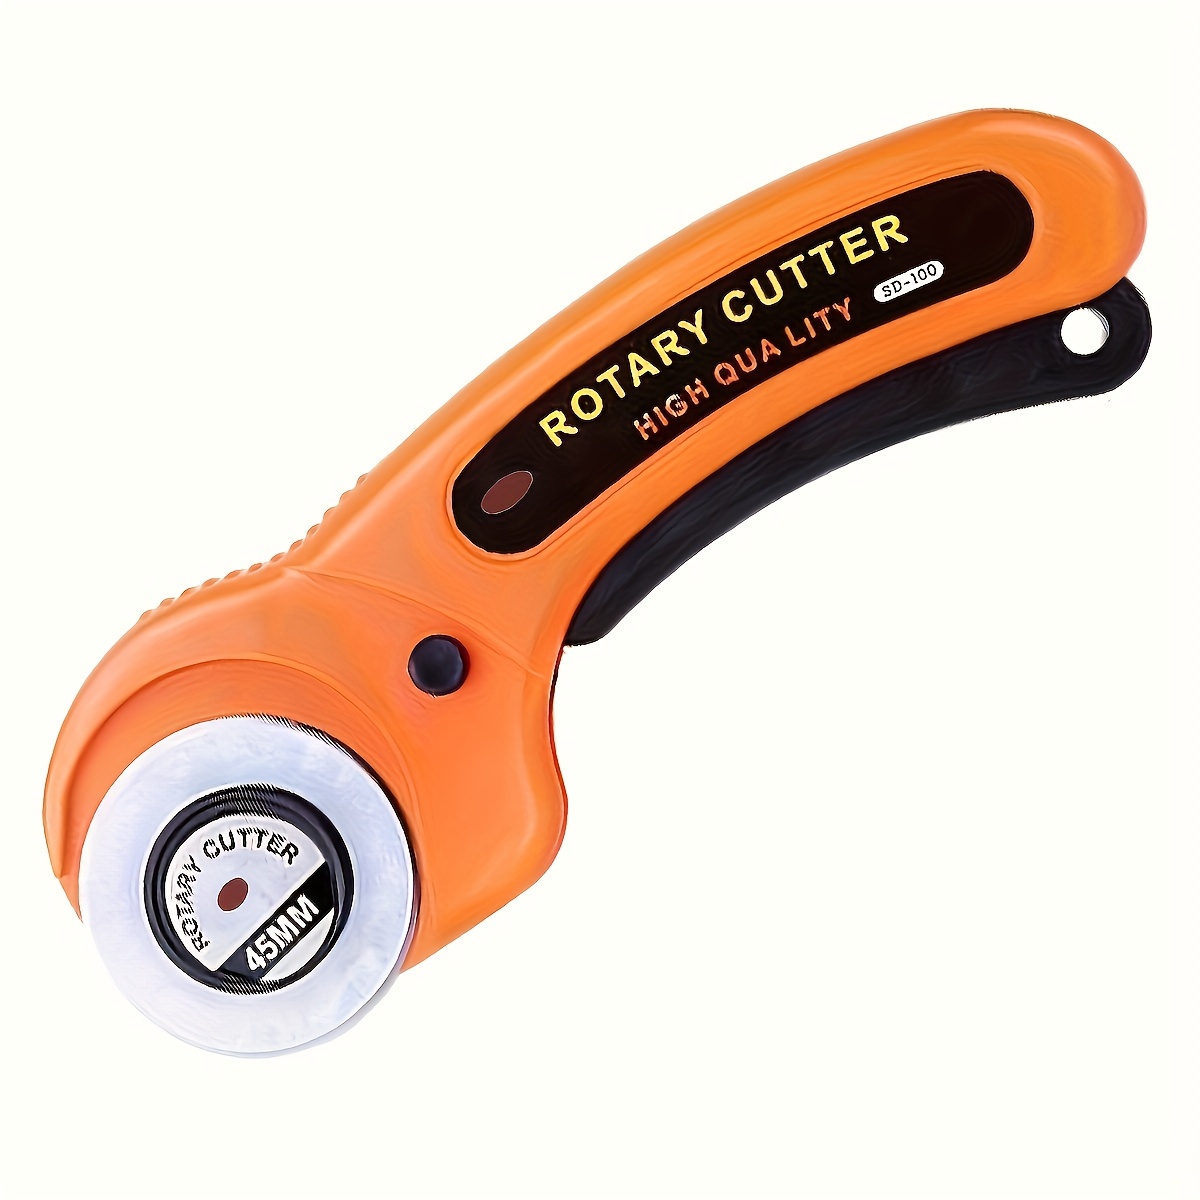  Fabric Roller Cutter, Sewing Rotary Cutter